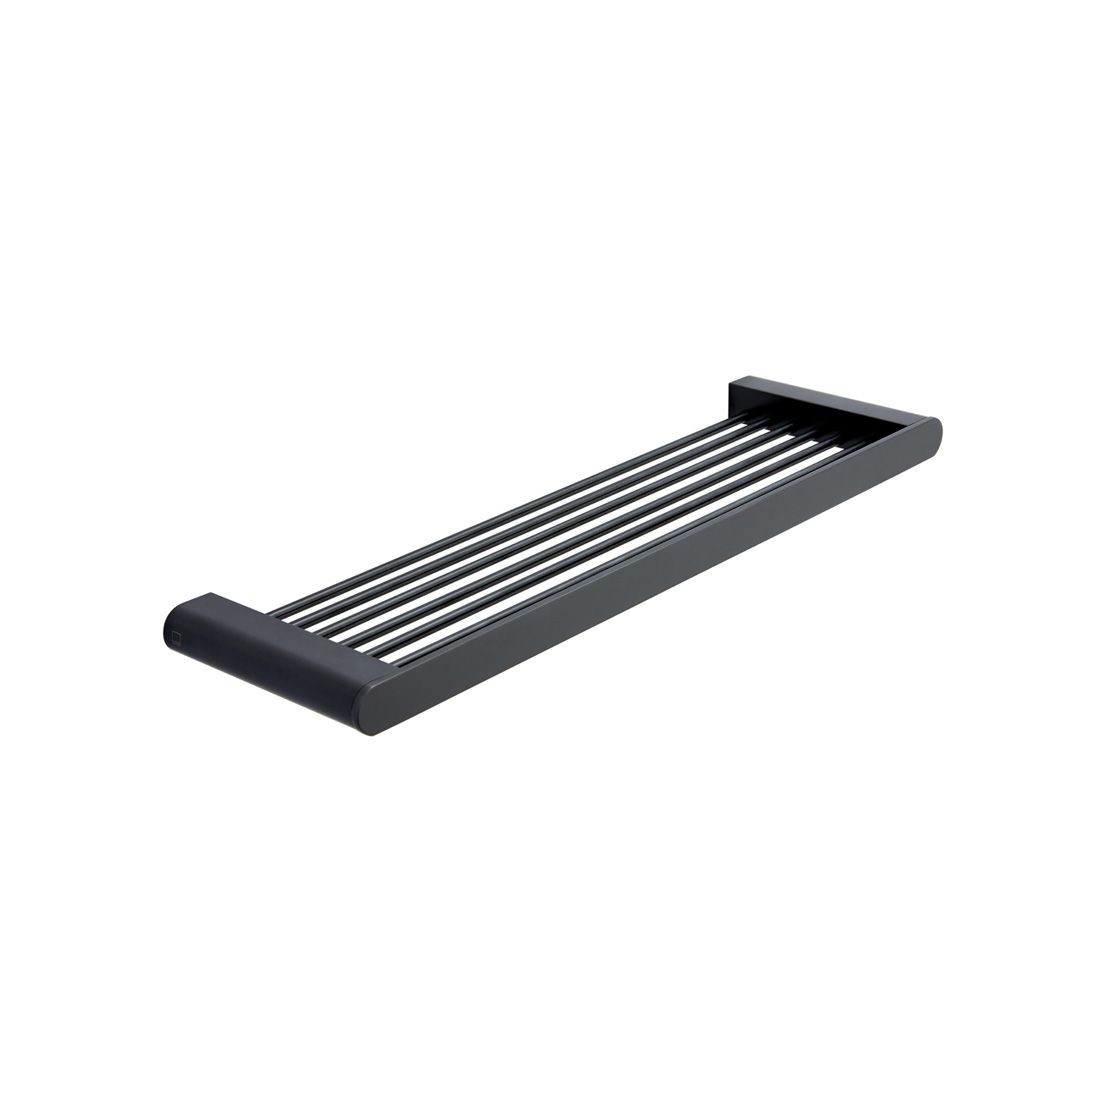 Individual by Vado Photon Shelf 380mm (15 inch) Brushed Black [IND-PHO185A-BLK]